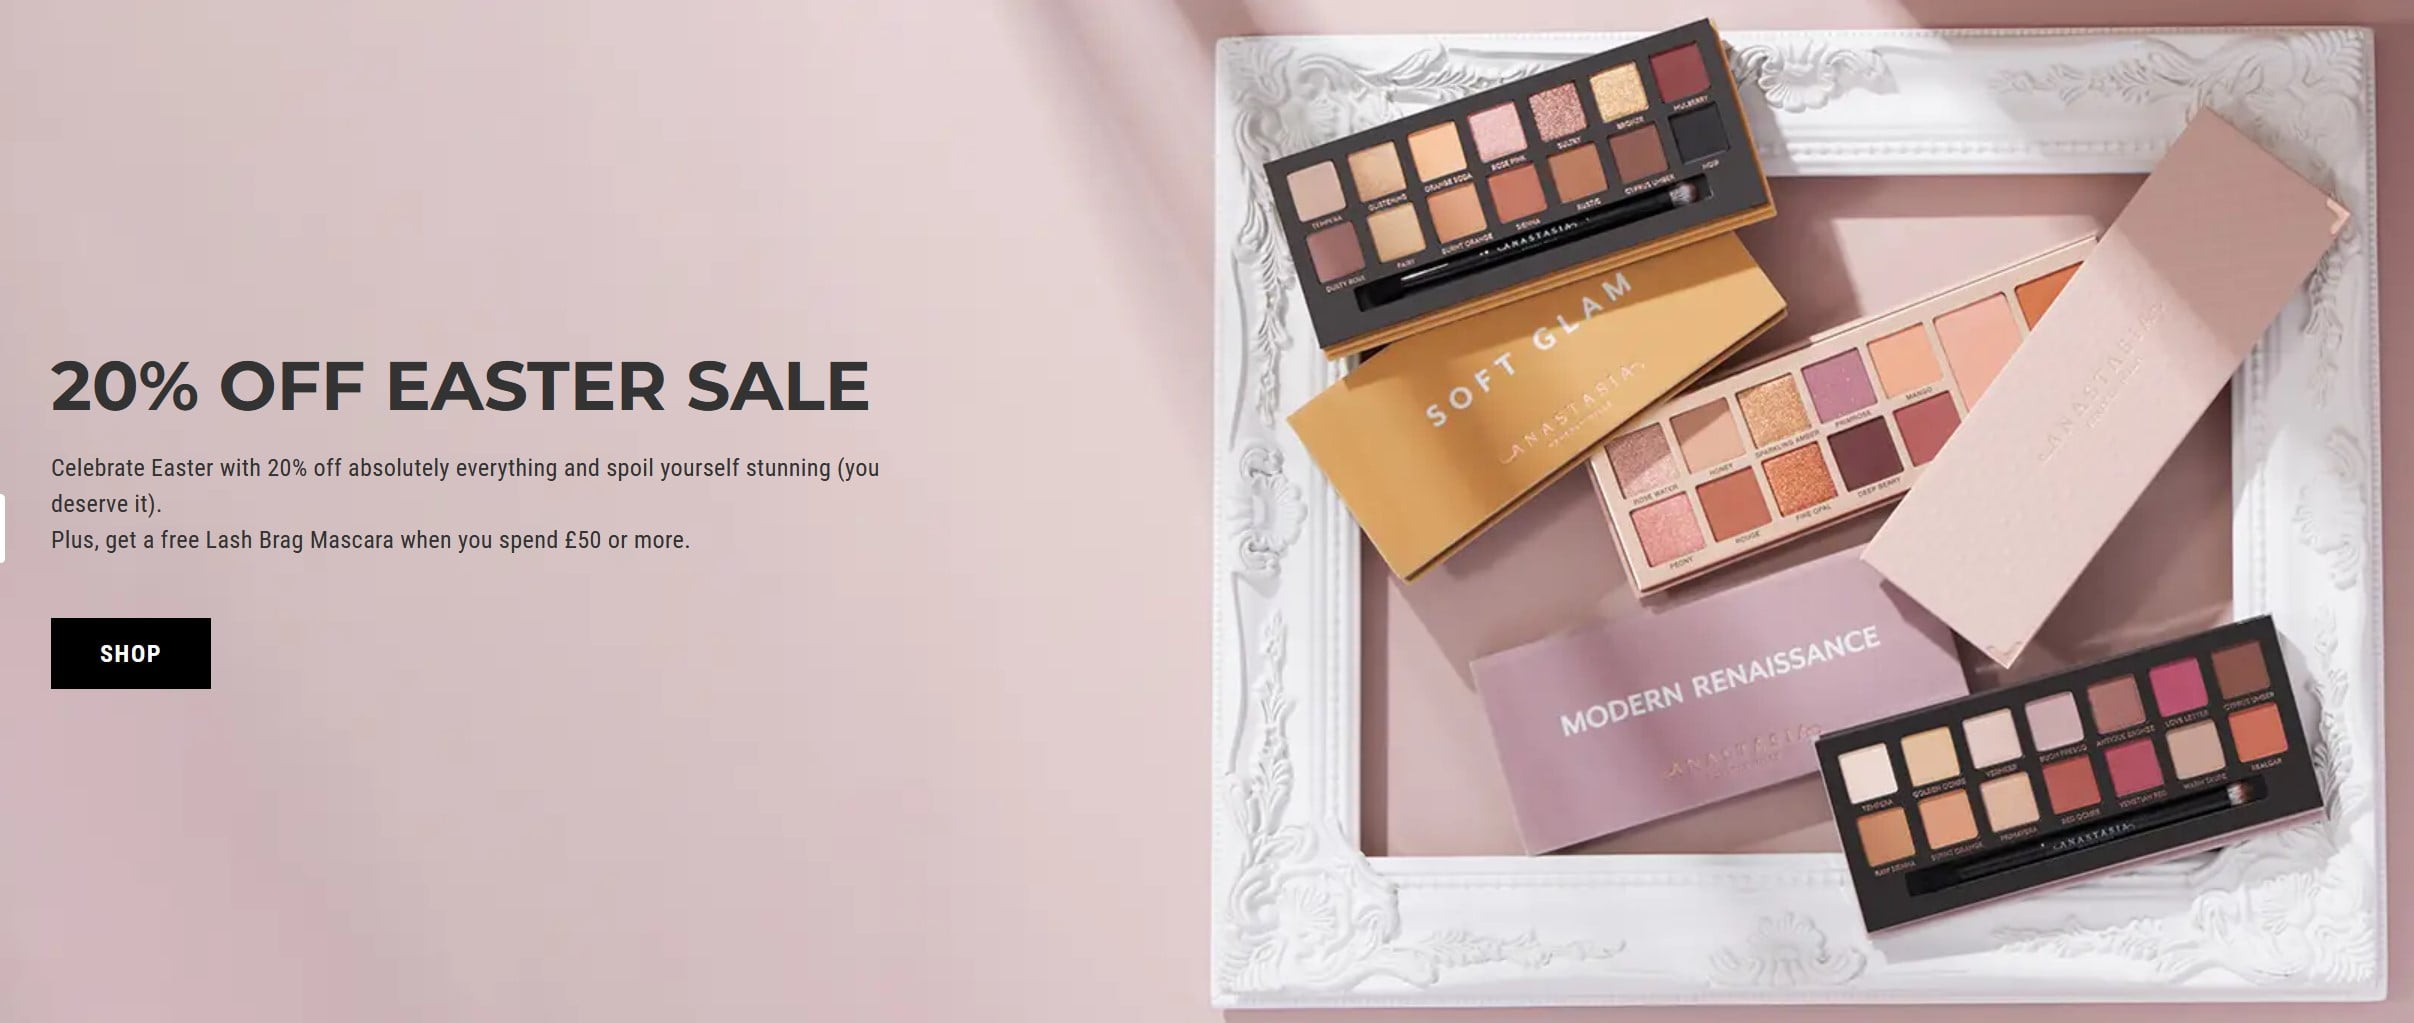 20% off sitewide + Free Lash Brag Mascara when you spend £50 at Anastasia Beverly Hills